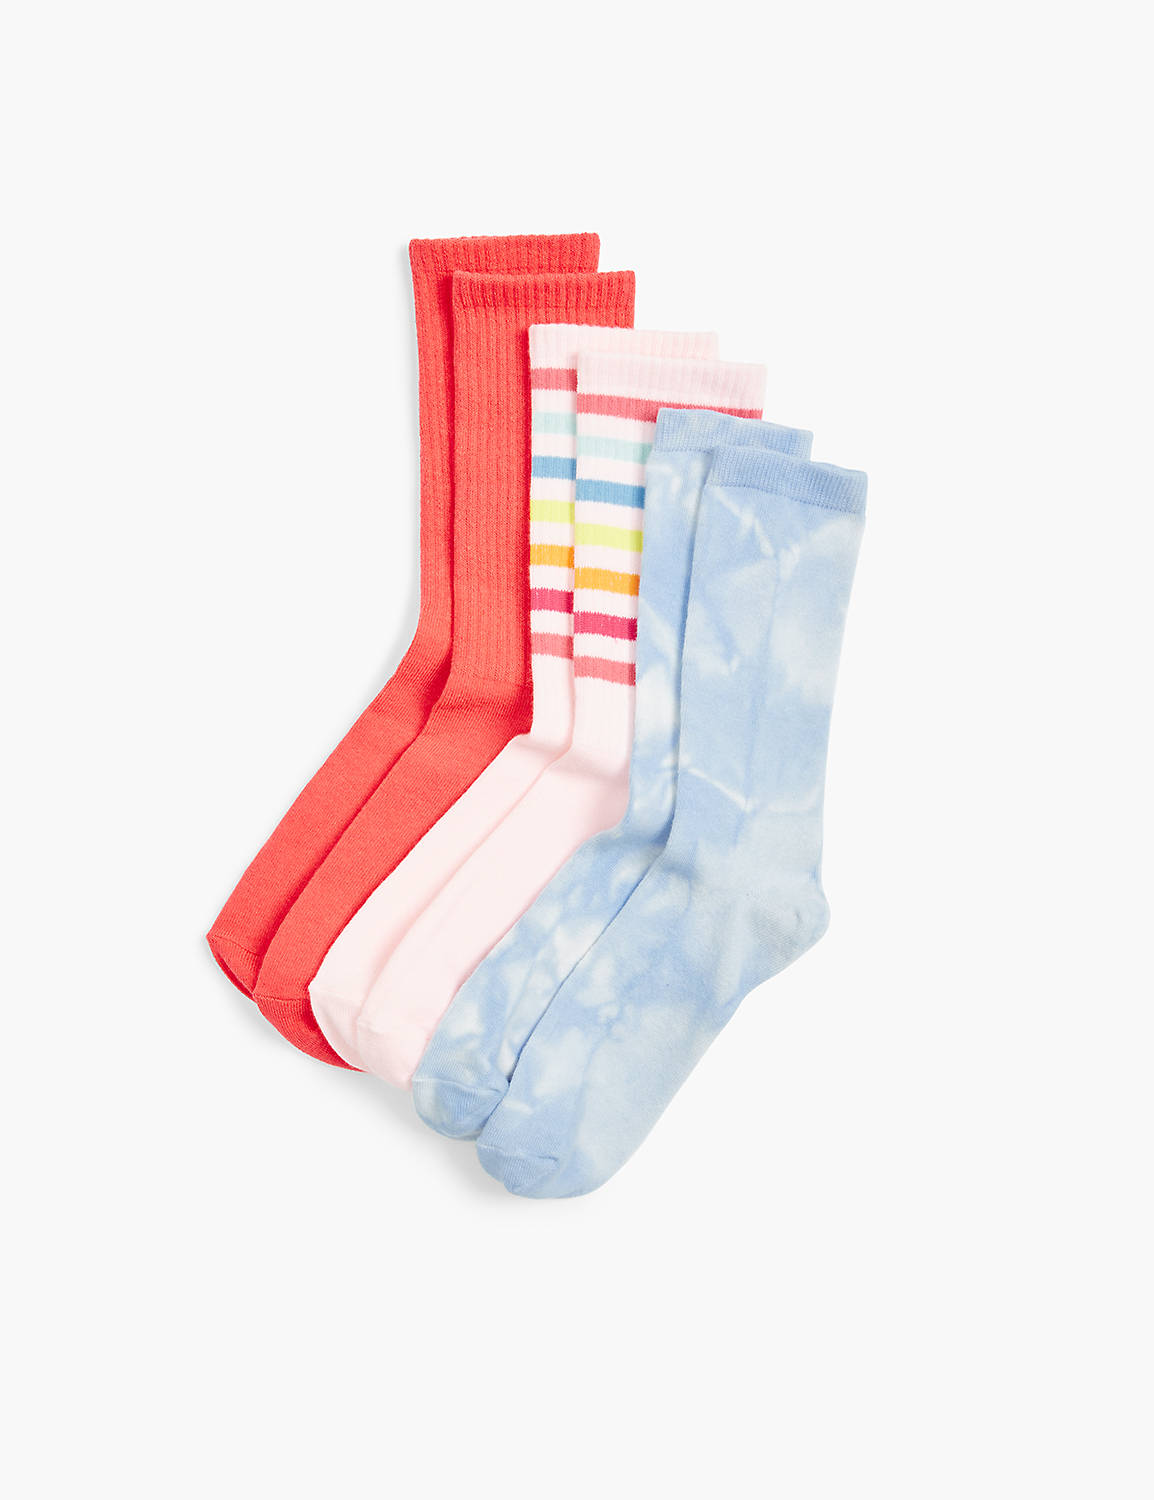 3 Pack Crew Sock S 1140420 Product Image 1